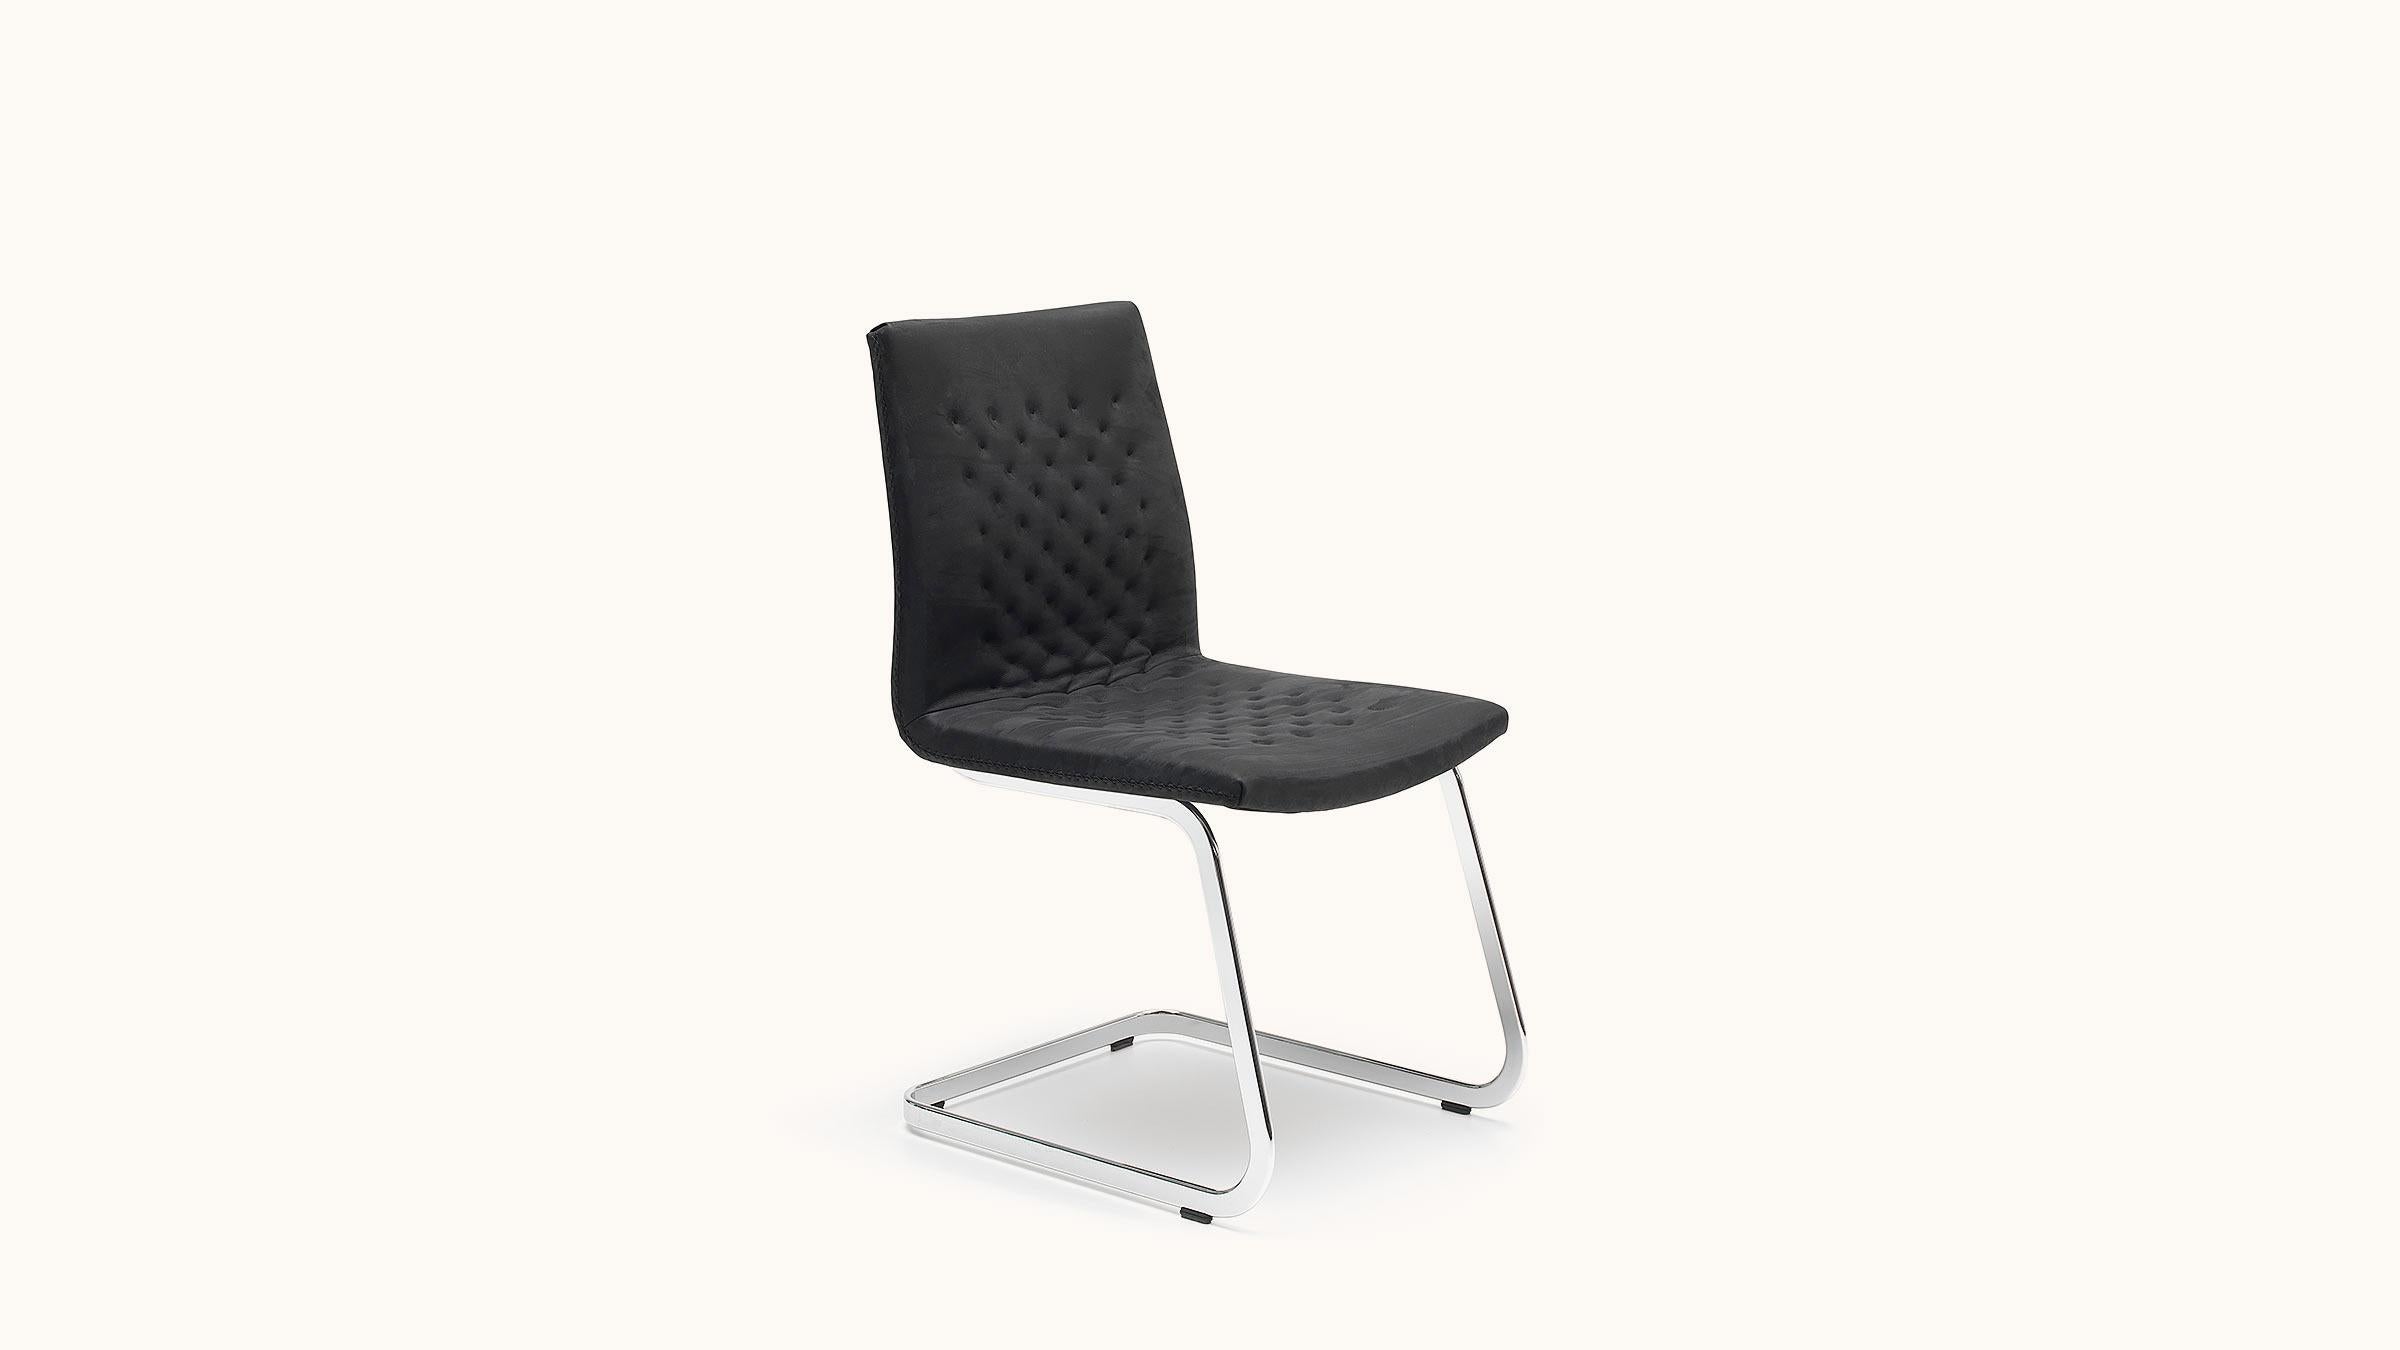 DS-1051 is available in a wide variety of versions: high- or low-backed, with or without armrests, as a cantilevered chair, with four-star swivel base or with a five-star base. Extremely filigree, elegant and luxurious in appearance, but without any